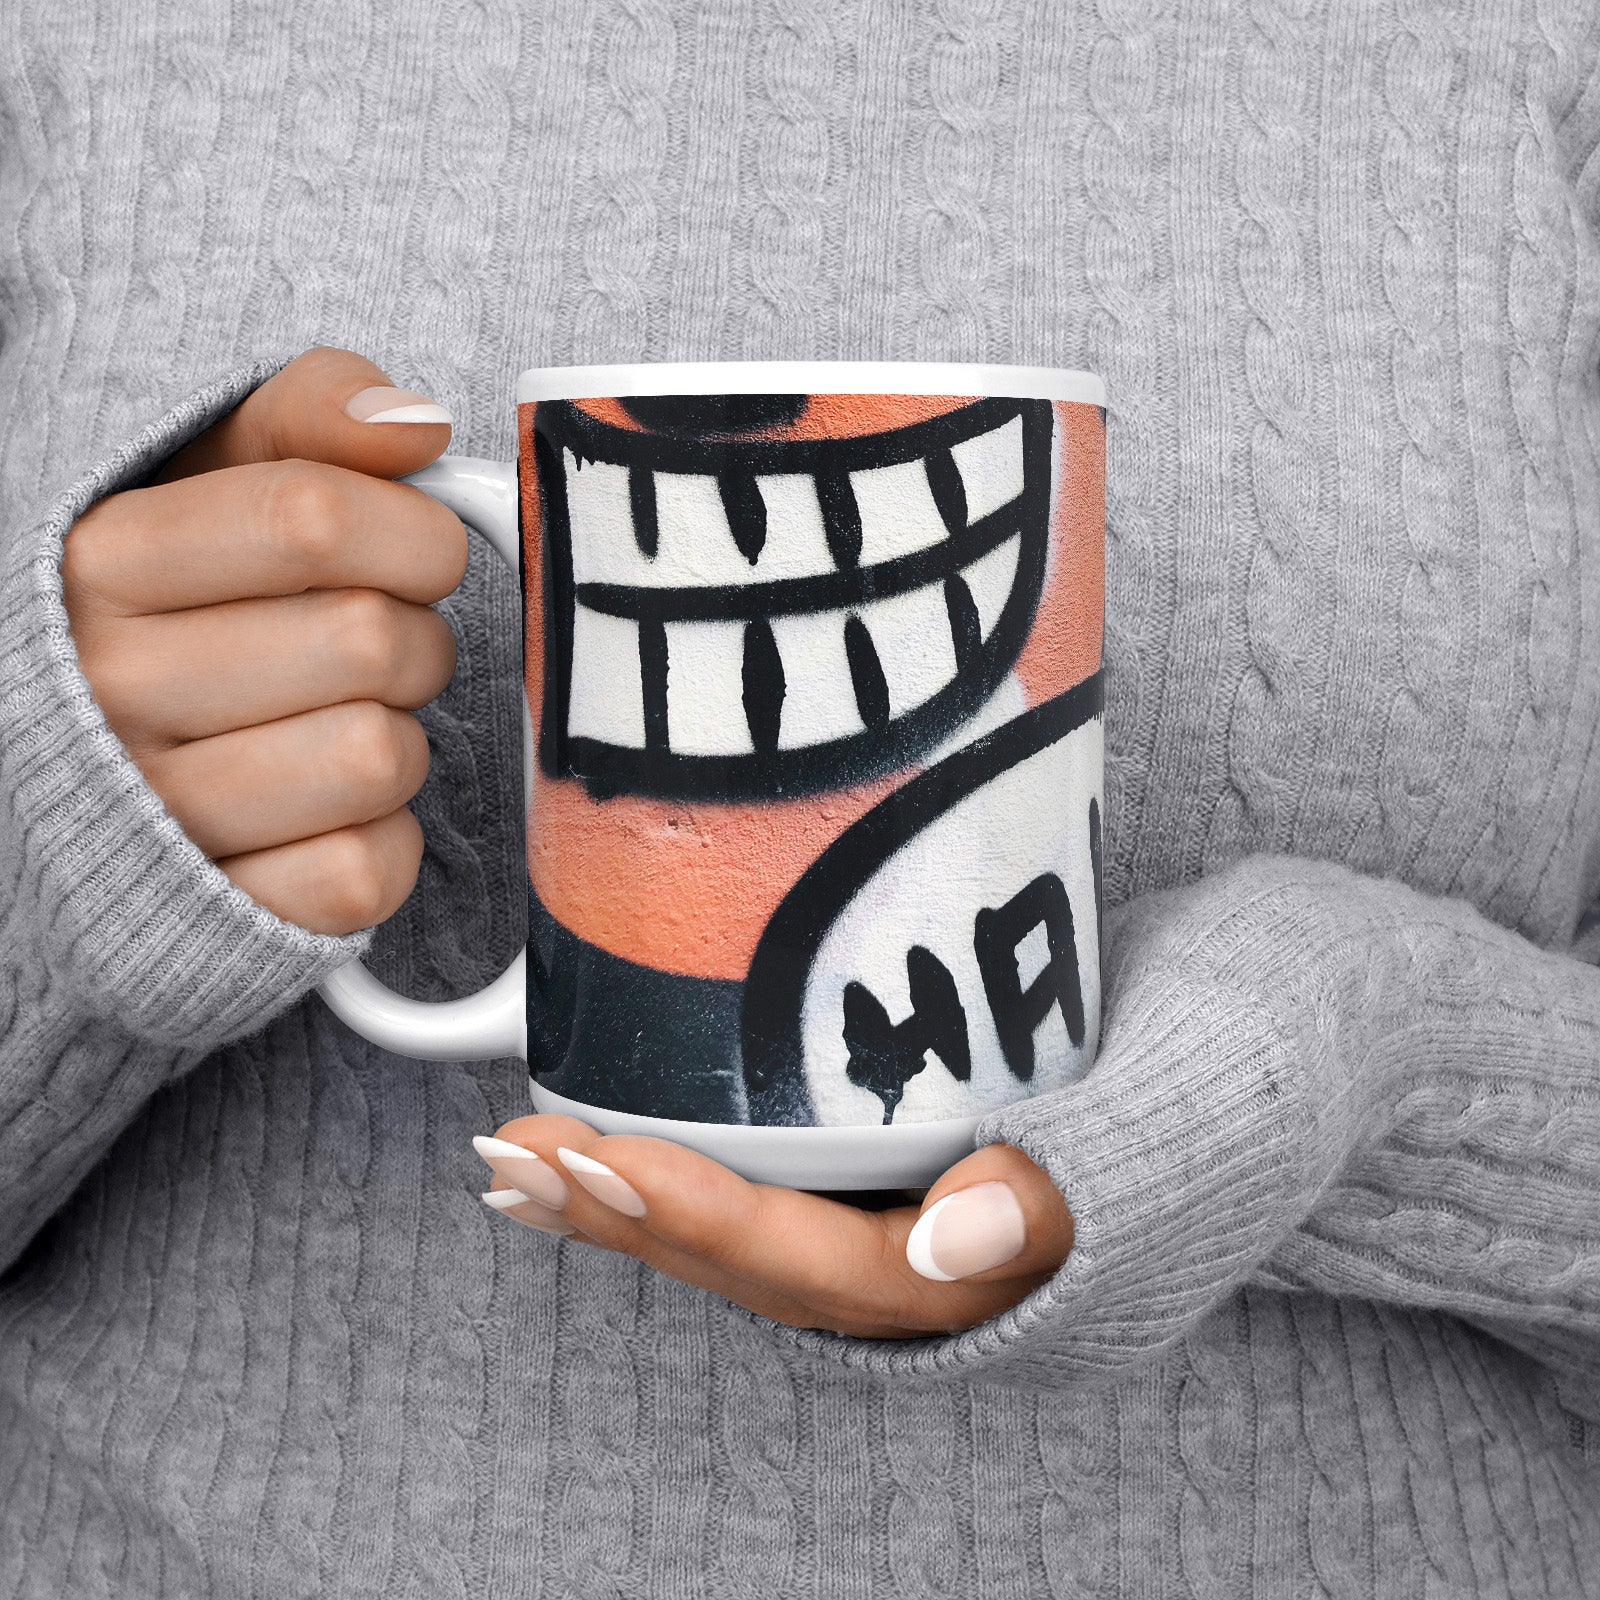 Be inspired by our Urban Art Coffee Mug "HA!" from Hamburg. This mug features an 15oz size with the handle on the left.